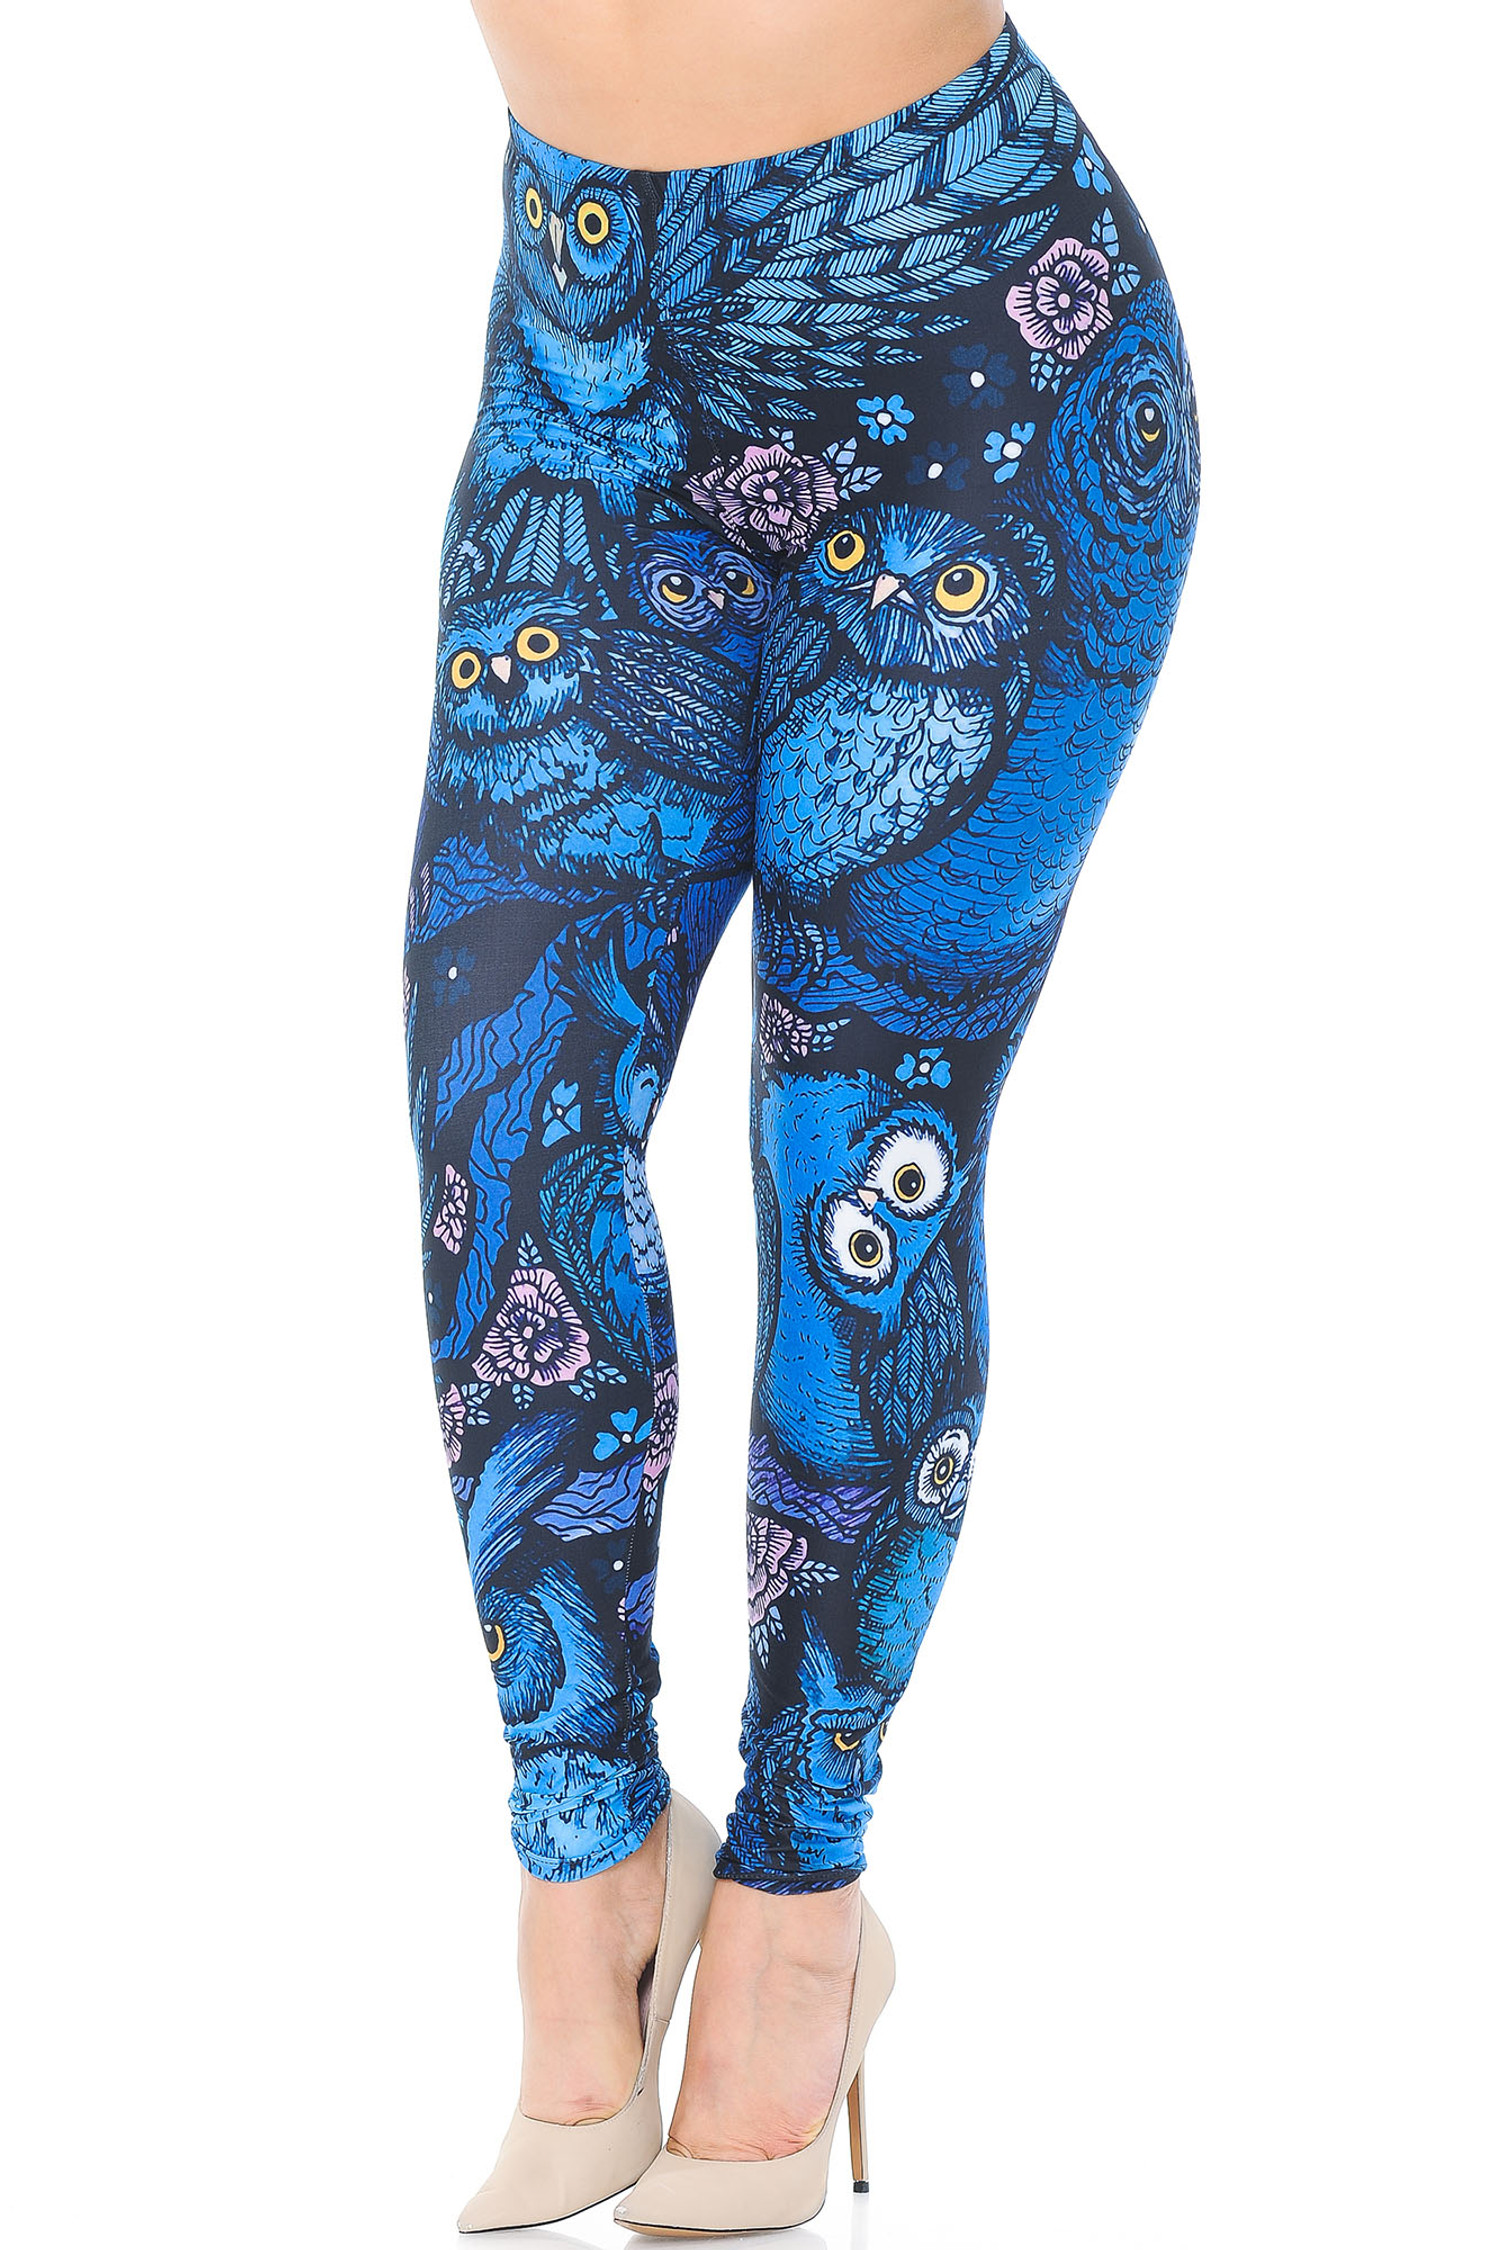 Creamy Soft Cute Cat Faces Plus Size Leggings - Version 2 - USA Fashion™ |  World of Pets Superstore